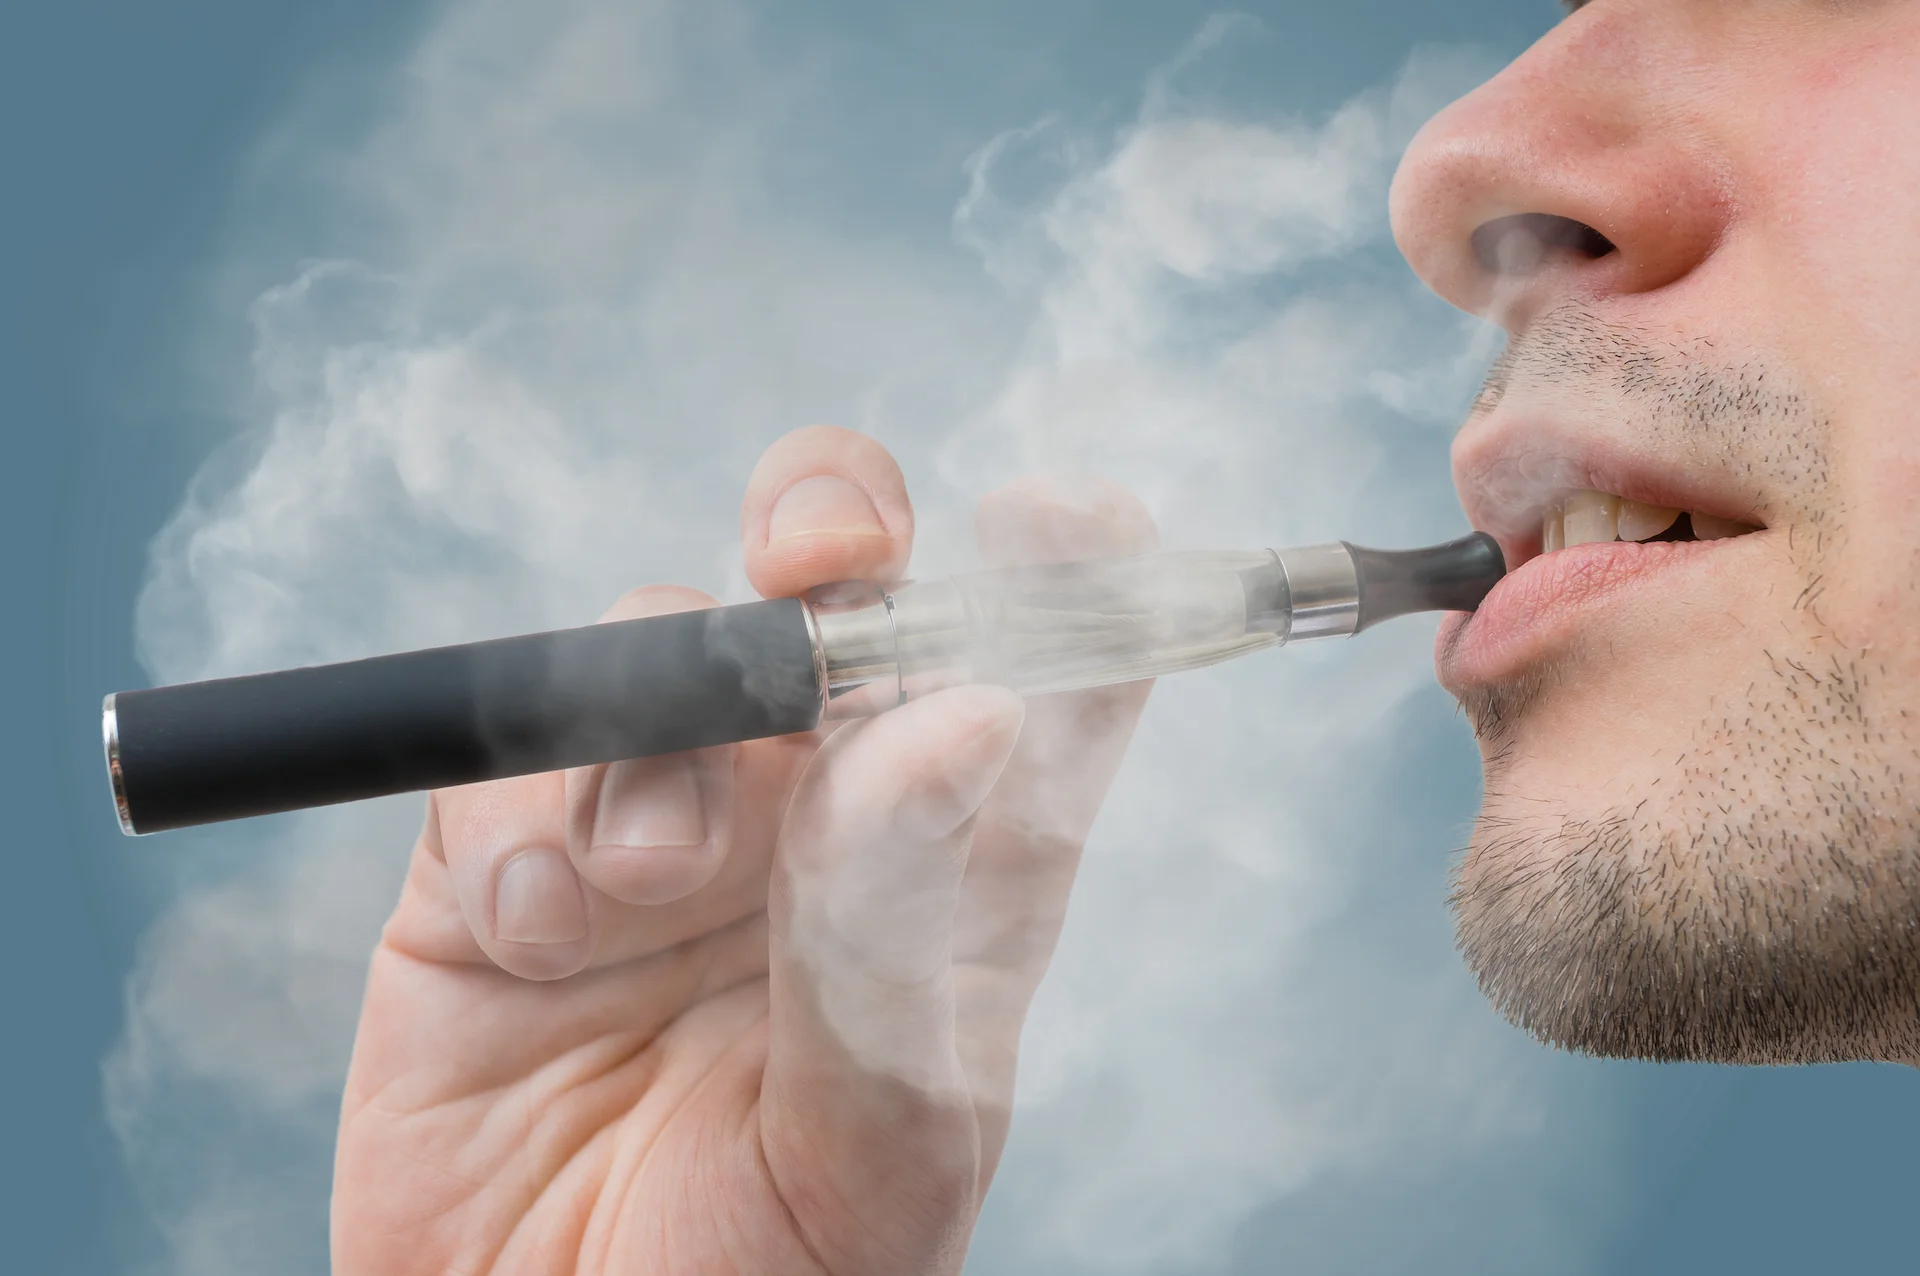 vapes e cigarettes can contribute to dental decay